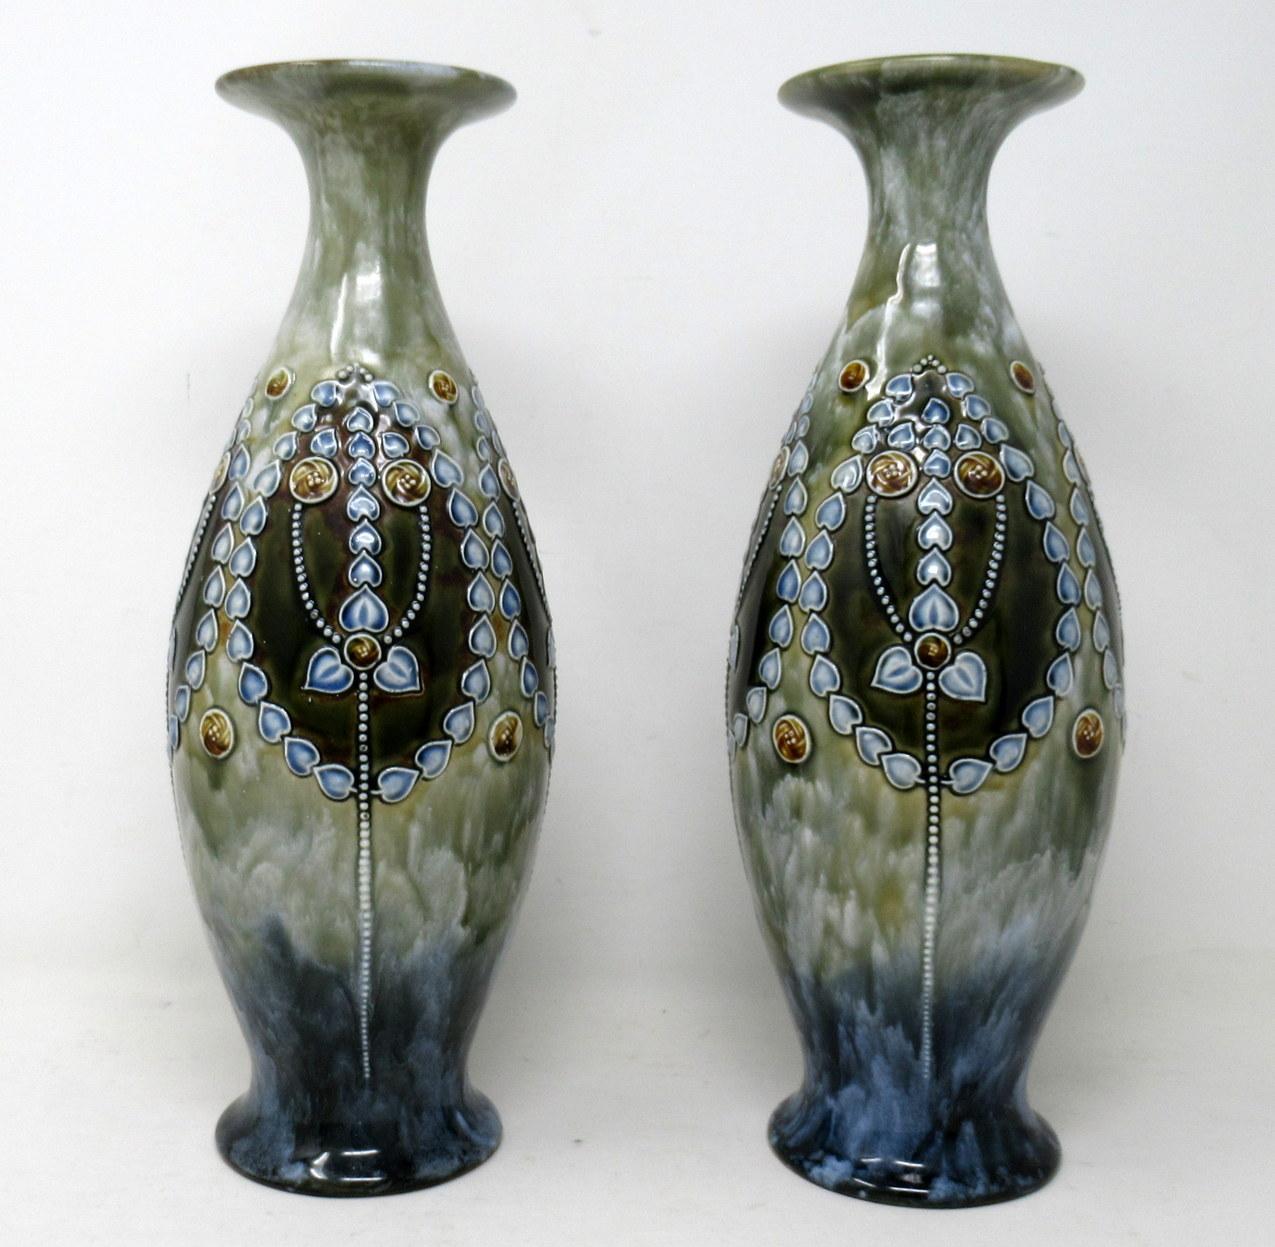 A very stylish Identical pair of English Royal Doulton Lambeth Moulded Salt-Glaze stoneware pottery long neck mantle vases of generous proportions. 

Each of bulbous form with flaired flat formed rims. Lavish Art Nouveau raised tube-line decoration